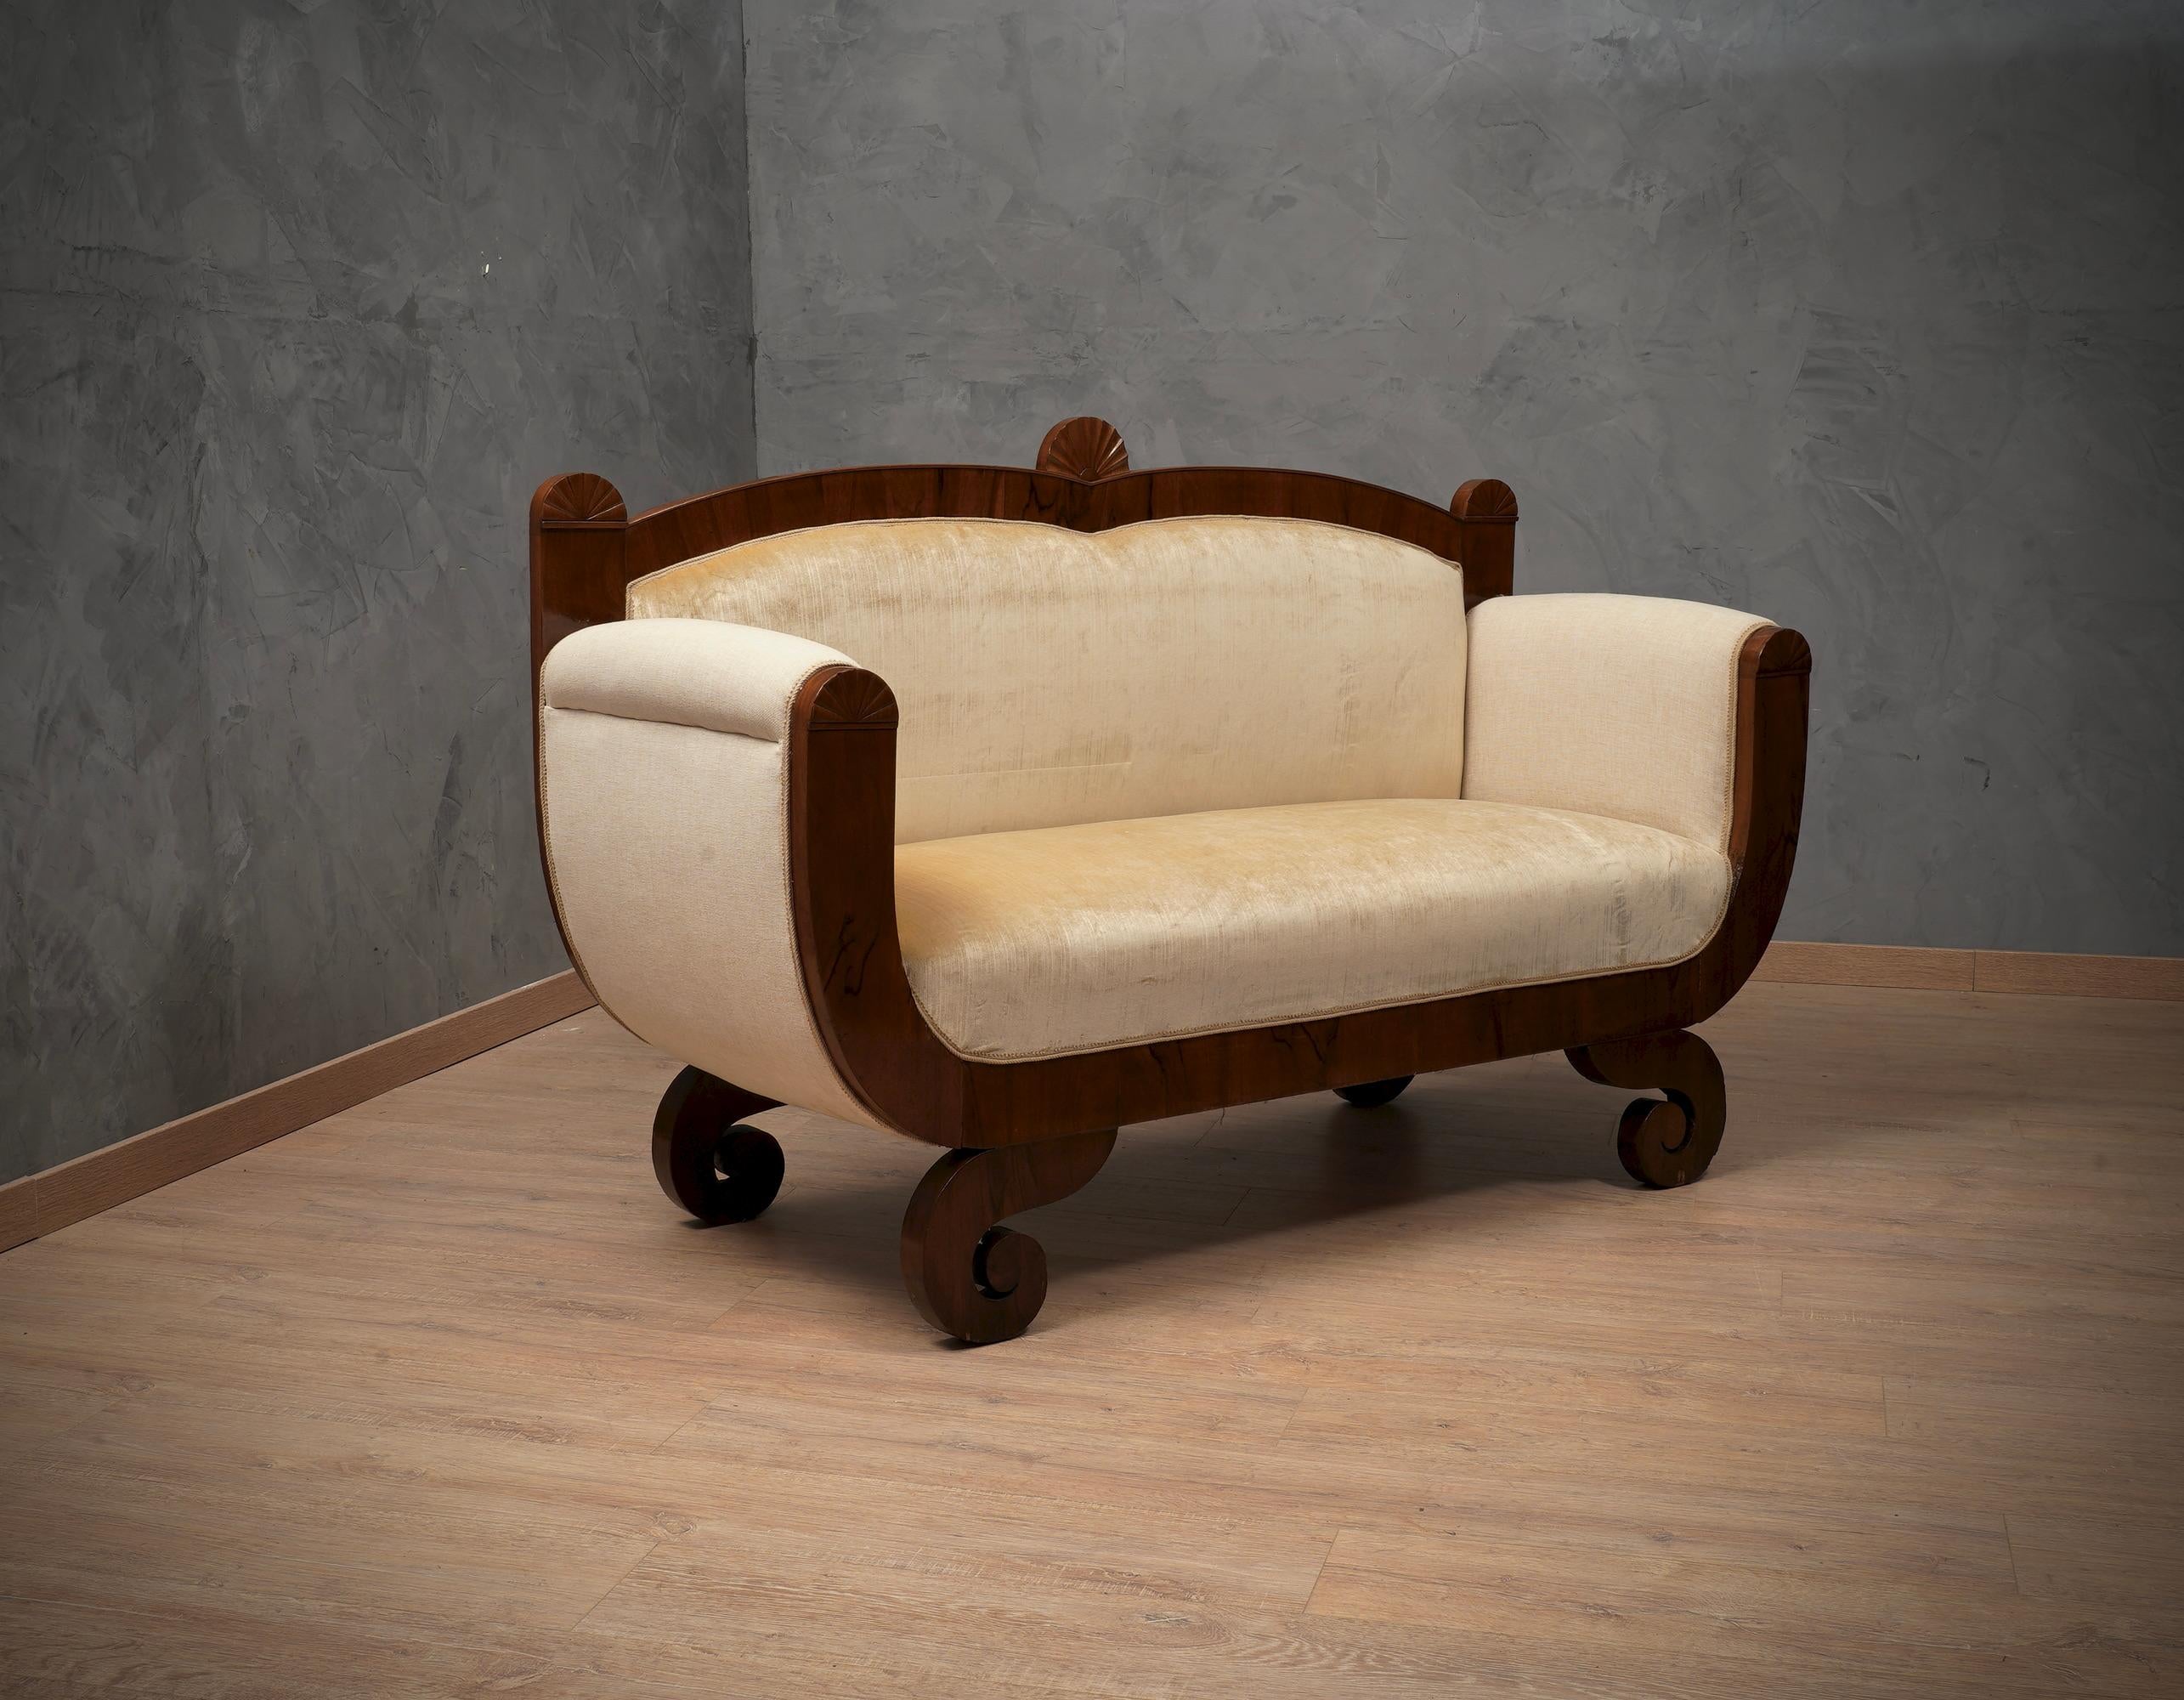 Biedermeier two-seat sofa. Sofa all veneered in walnut wood and covered in beige color velvet and combined fabric. 

The sofa is small in size, and seats two people well. It is made up of a band veneered in walnut wood, which starts from an